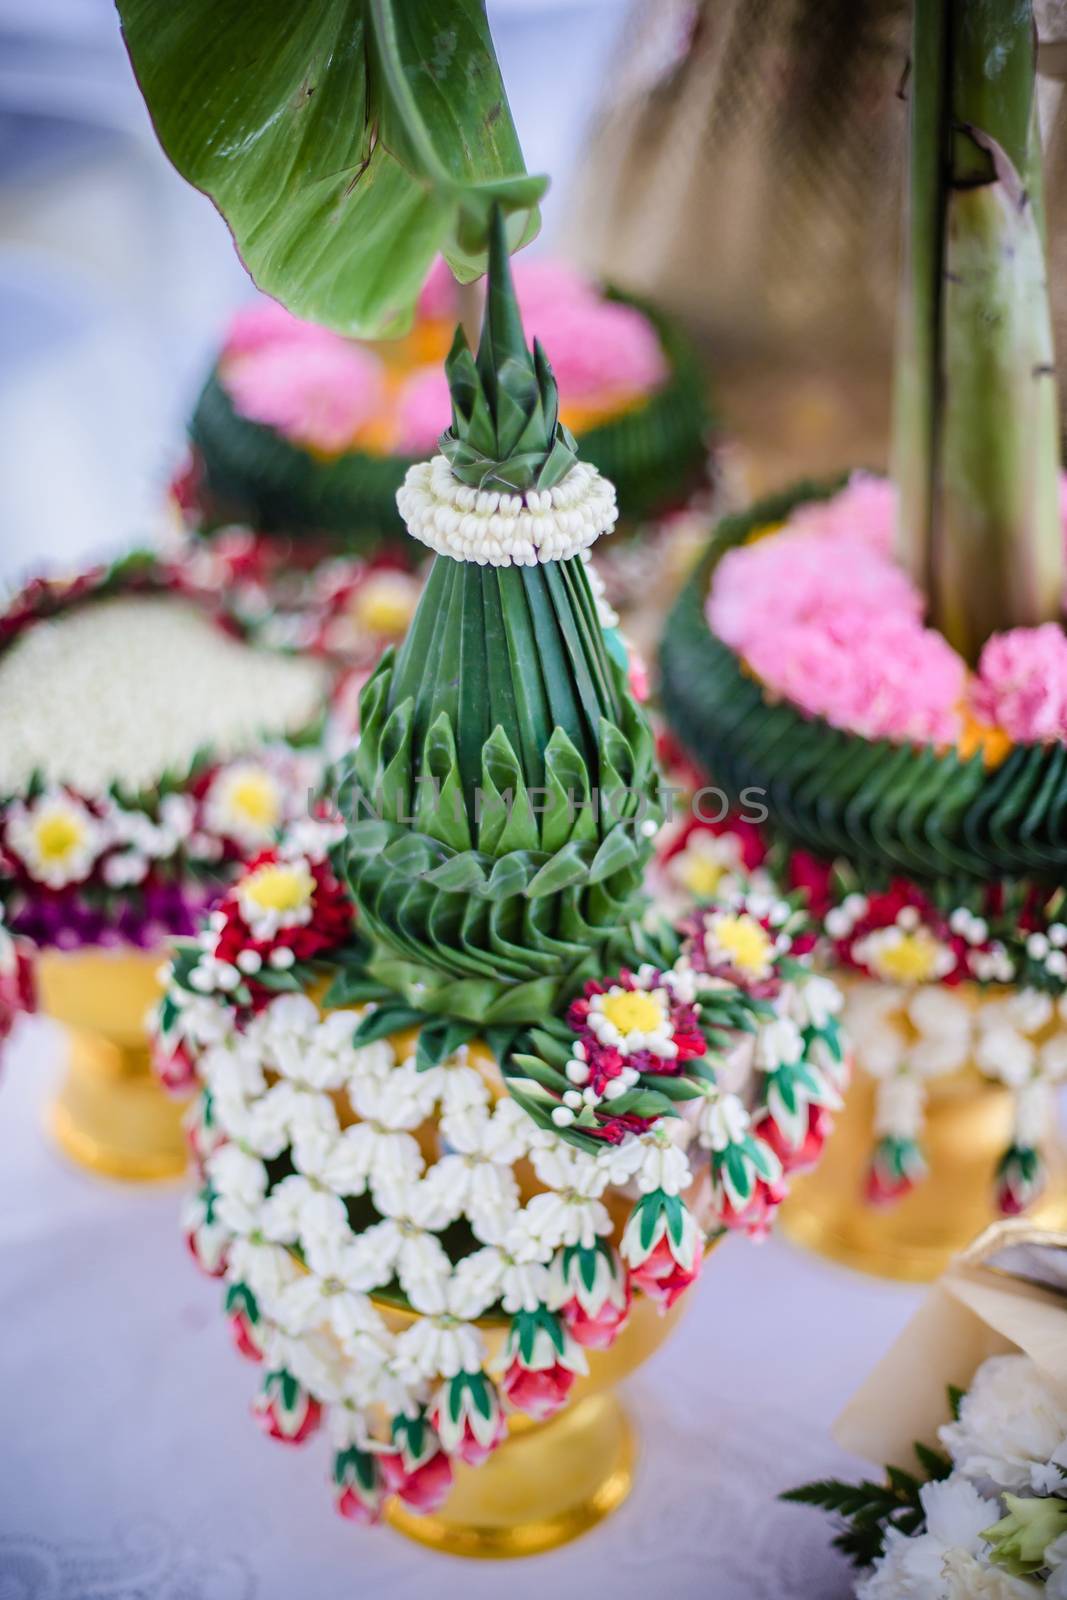 Flower tray for Thai traditional wedding by psodaz